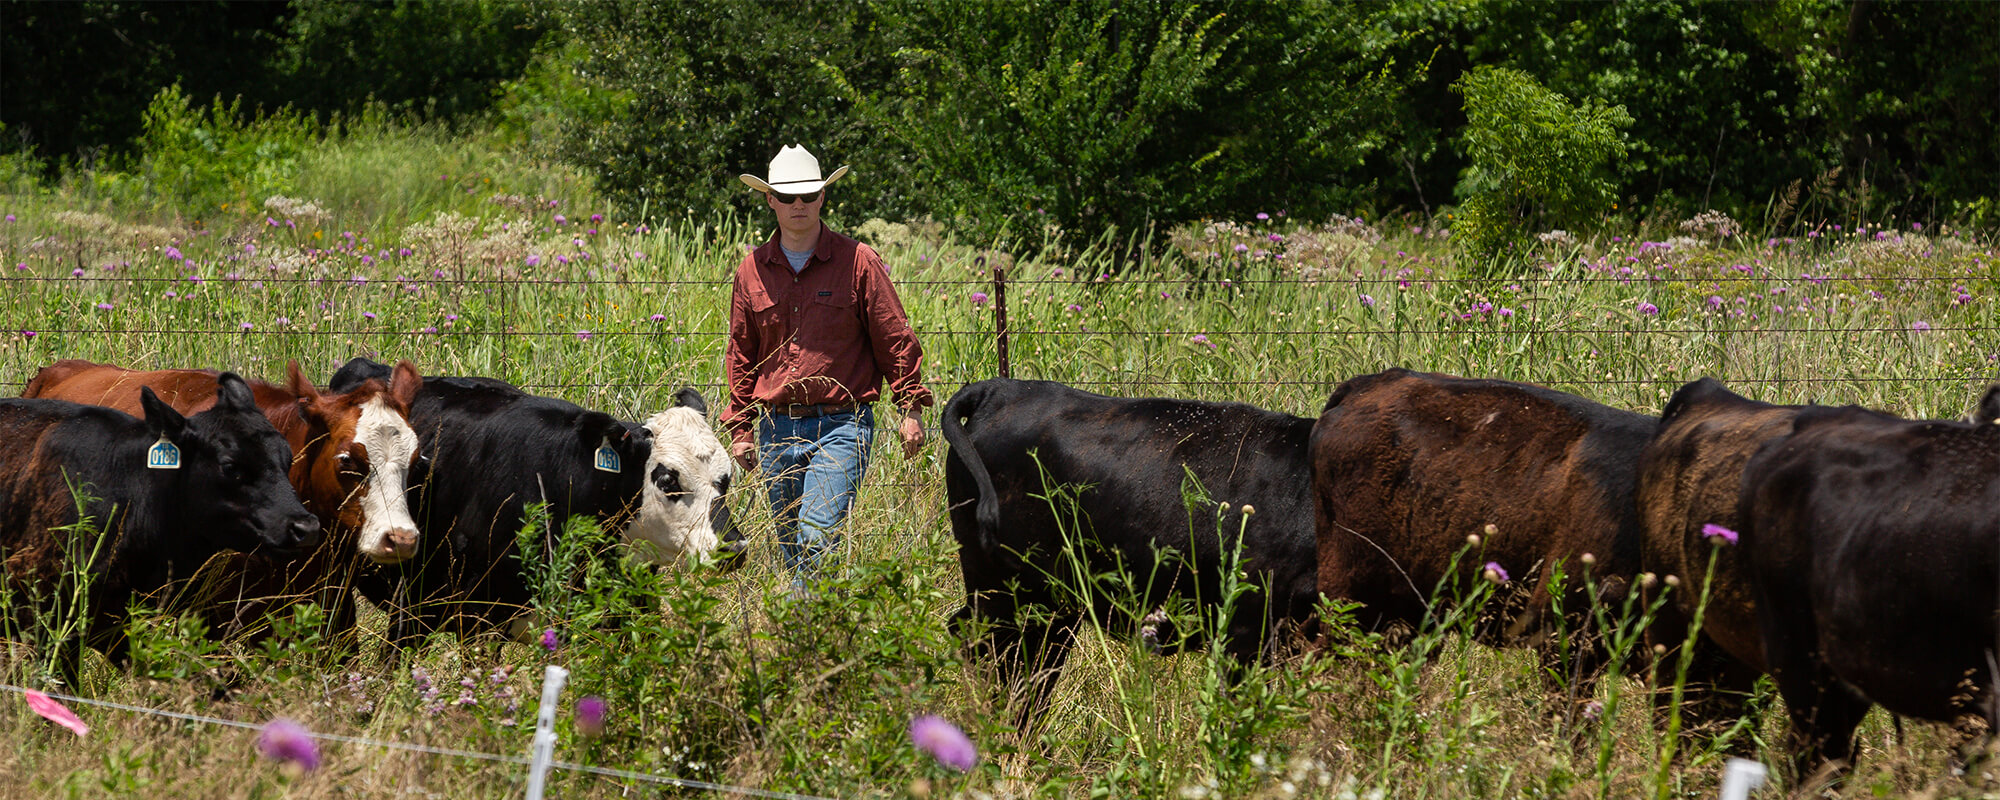 Rancher with a herd of cattle